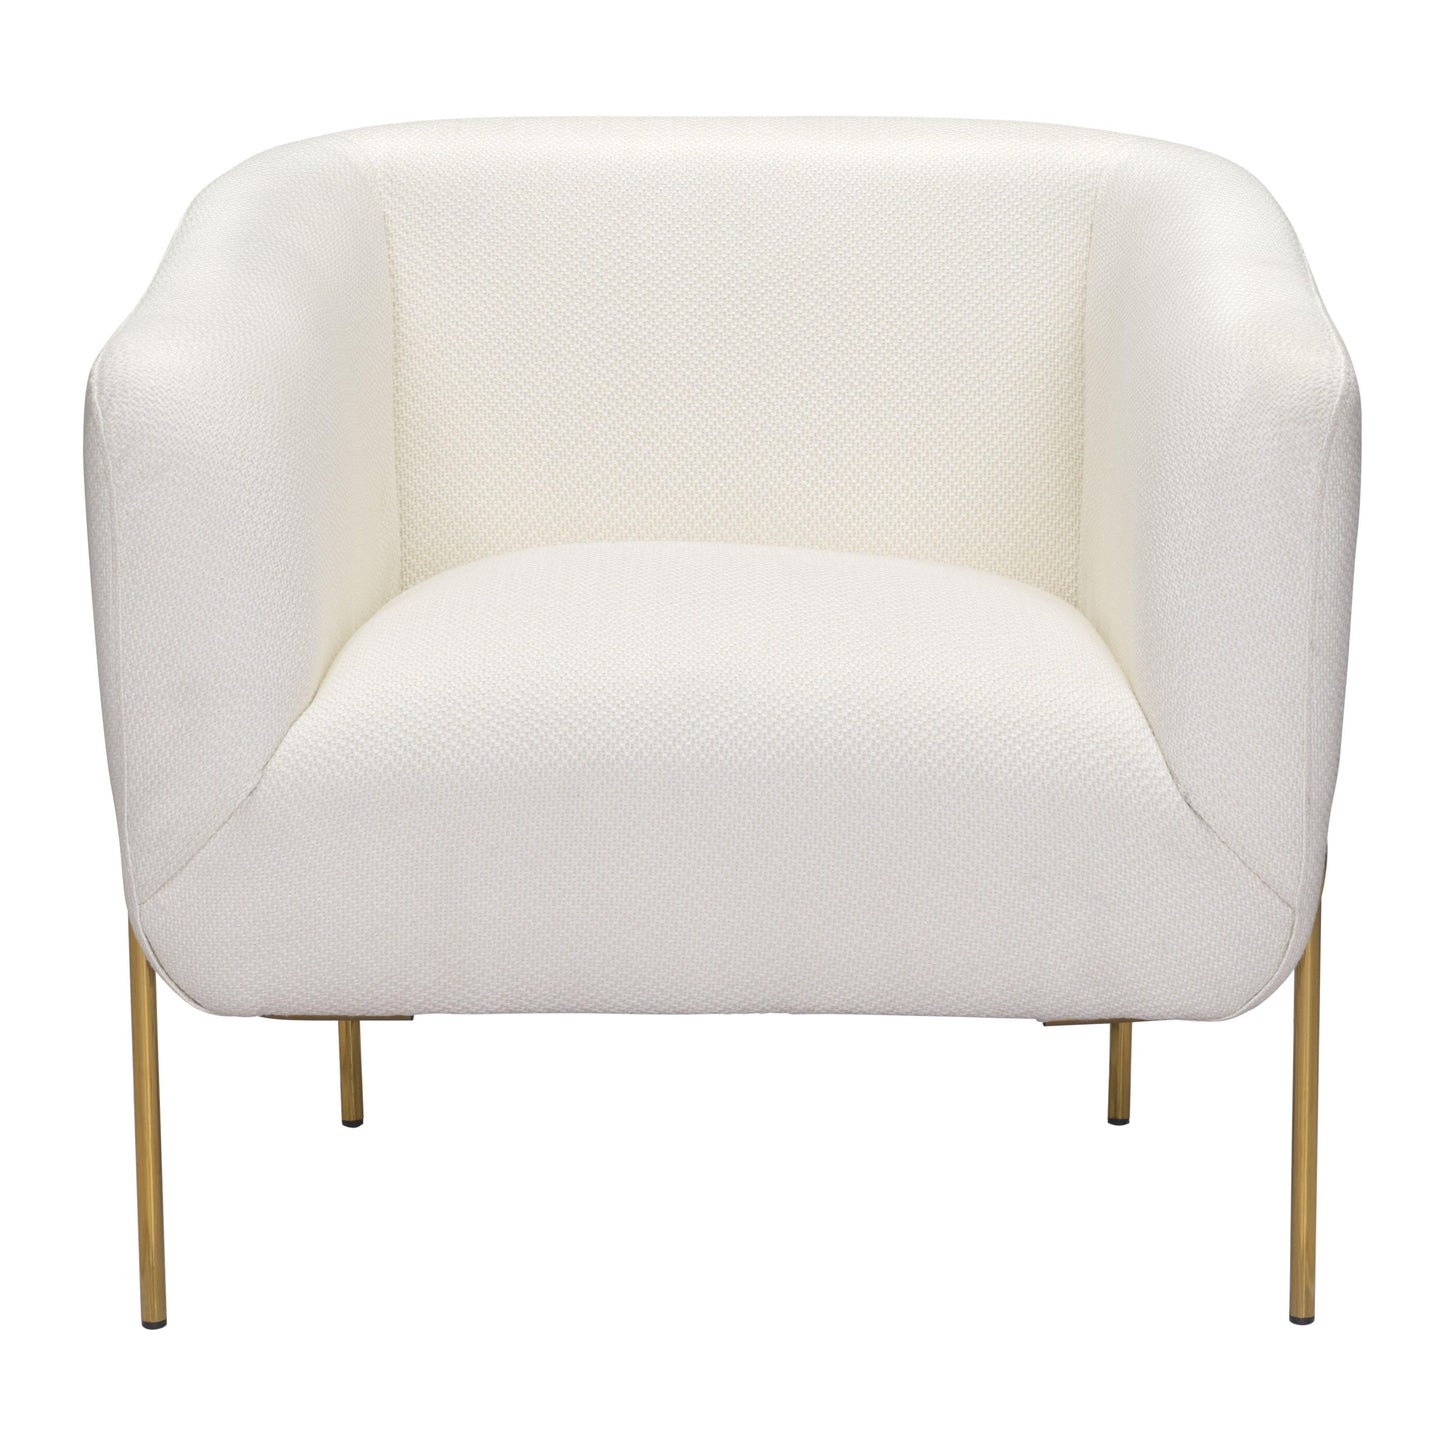 Micaela Arm Chair Ivory & Gold - Sideboards and Things Accents_Gold, Brand_Zuo Modern, Color_Gold, Color_Ivory, Finish_Polished, Materials_Metal, Metal Type_Steel, Product Type_Arm Chair, Upholstery Type_Fabric Blend, Upholstery Type_Polyester